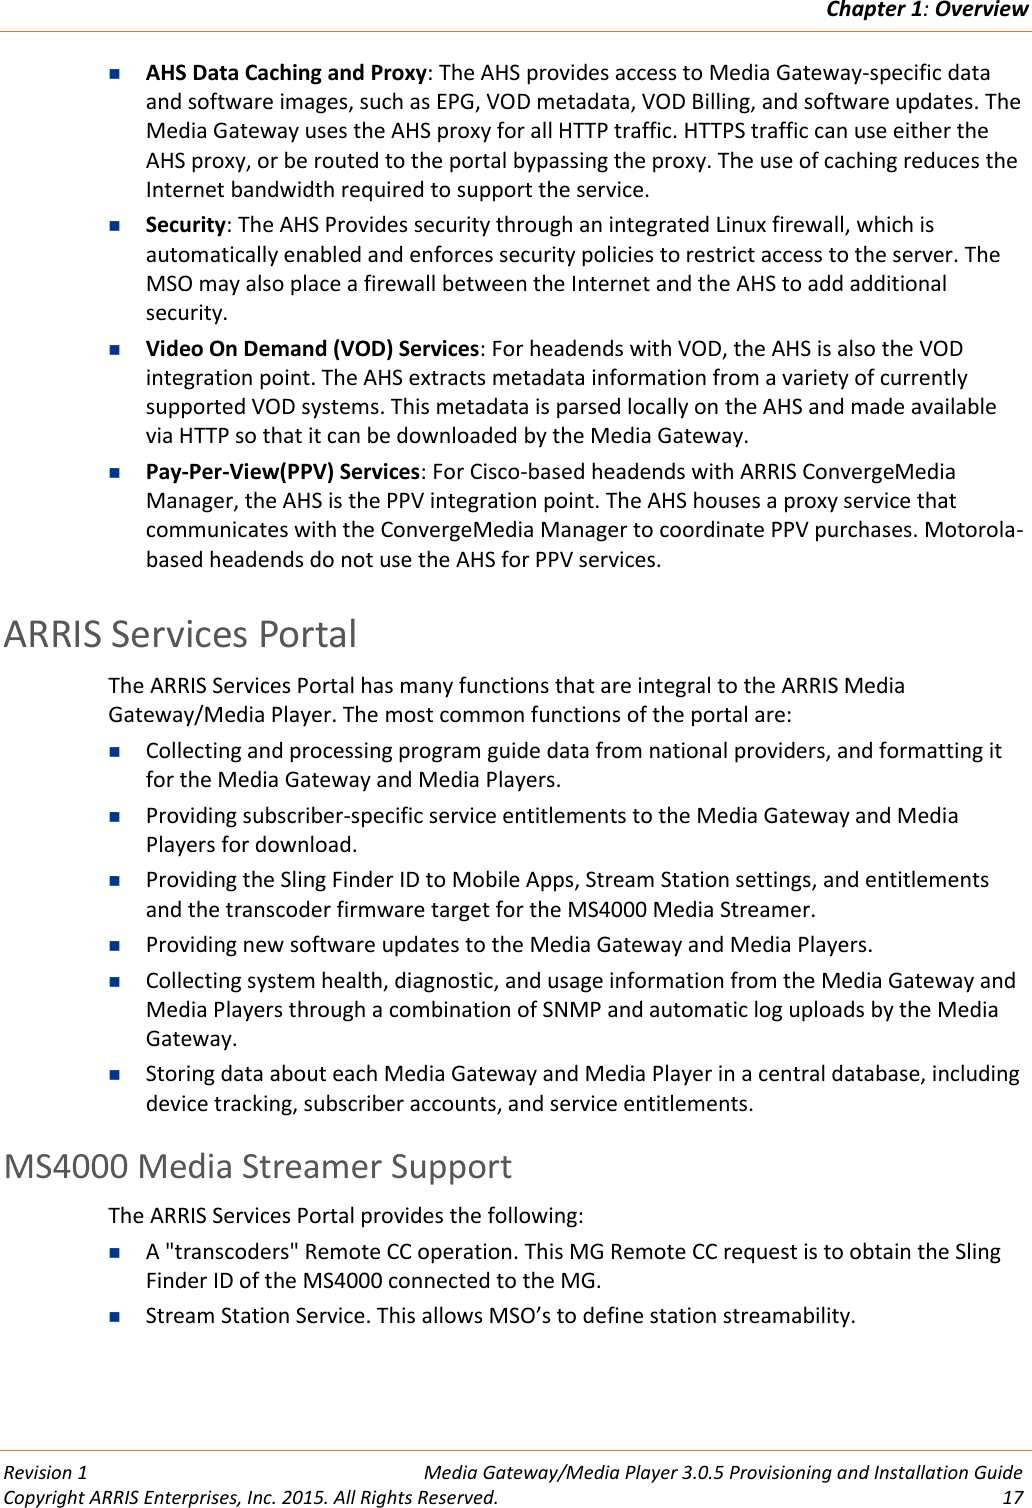 Chapter 1: Overview  Revision 1  Media Gateway/Media Player 3.0.5 Provisioning and Installation Guide Copyright ARRIS Enterprises, Inc. 2015. All Rights Reserved.  17   AHS Data Caching and Proxy: The AHS provides access to Media Gateway-specific data and software images, such as EPG, VOD metadata, VOD Billing, and software updates. The Media Gateway uses the AHS proxy for all HTTP traffic. HTTPS traffic can use either the AHS proxy, or be routed to the portal bypassing the proxy. The use of caching reduces the Internet bandwidth required to support the service.  Security: The AHS Provides security through an integrated Linux firewall, which is automatically enabled and enforces security policies to restrict access to the server. The MSO may also place a firewall between the Internet and the AHS to add additional security.  Video On Demand (VOD) Services: For headends with VOD, the AHS is also the VOD integration point. The AHS extracts metadata information from a variety of currently supported VOD systems. This metadata is parsed locally on the AHS and made available via HTTP so that it can be downloaded by the Media Gateway.  Pay-Per-View(PPV) Services: For Cisco-based headends with ARRIS ConvergeMedia Manager, the AHS is the PPV integration point. The AHS houses a proxy service that communicates with the ConvergeMedia Manager to coordinate PPV purchases. Motorola-based headends do not use the AHS for PPV services.   ARRIS Services Portal The ARRIS Services Portal has many functions that are integral to the ARRIS Media Gateway/Media Player. The most common functions of the portal are:  Collecting and processing program guide data from national providers, and formatting it for the Media Gateway and Media Players.  Providing subscriber-specific service entitlements to the Media Gateway and Media Players for download.  Providing the Sling Finder ID to Mobile Apps, Stream Station settings, and entitlements and the transcoder firmware target for the MS4000 Media Streamer.  Providing new software updates to the Media Gateway and Media Players.  Collecting system health, diagnostic, and usage information from the Media Gateway and Media Players through a combination of SNMP and automatic log uploads by the Media Gateway.  Storing data about each Media Gateway and Media Player in a central database, including device tracking, subscriber accounts, and service entitlements. MS4000 Media Streamer Support The ARRIS Services Portal provides the following:  A &quot;transcoders&quot; Remote CC operation. This MG Remote CC request is to obtain the Sling Finder ID of the MS4000 connected to the MG.  Stream Station Service. This allows MSO’s to define station streamability.   